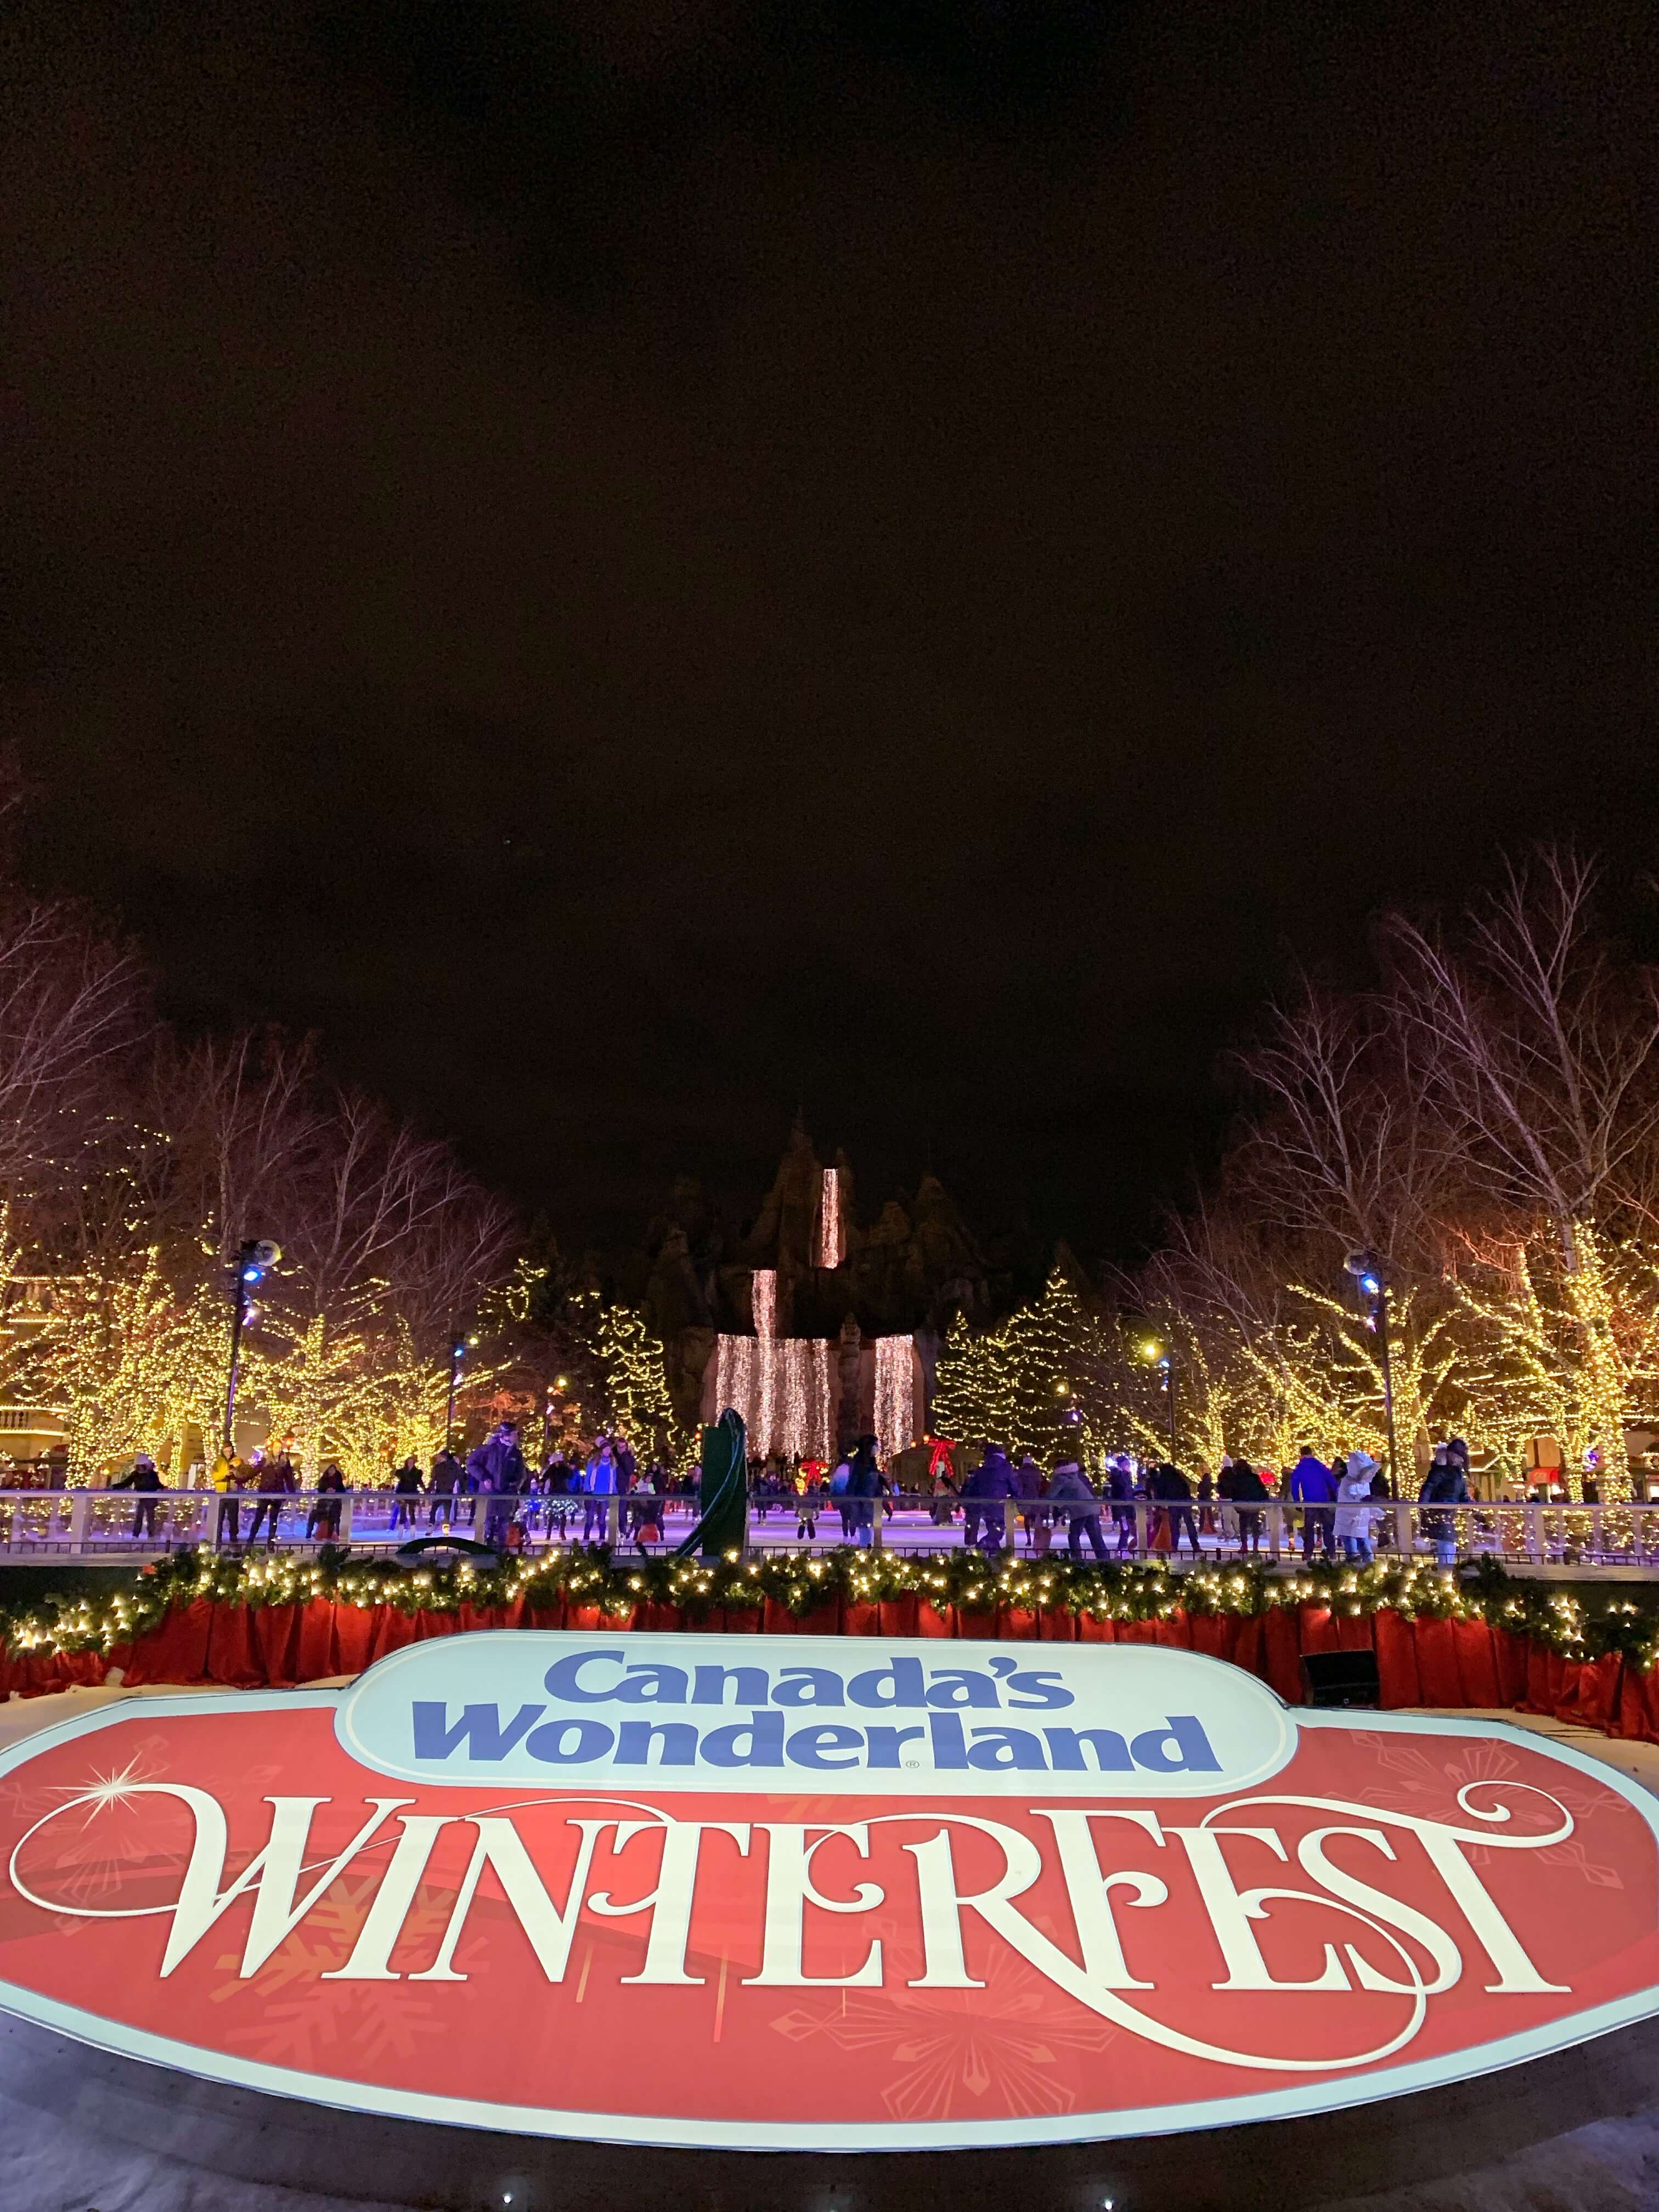 WinterFest Canada's Wonderland; what to do at Winterfest at Canada's wonderland